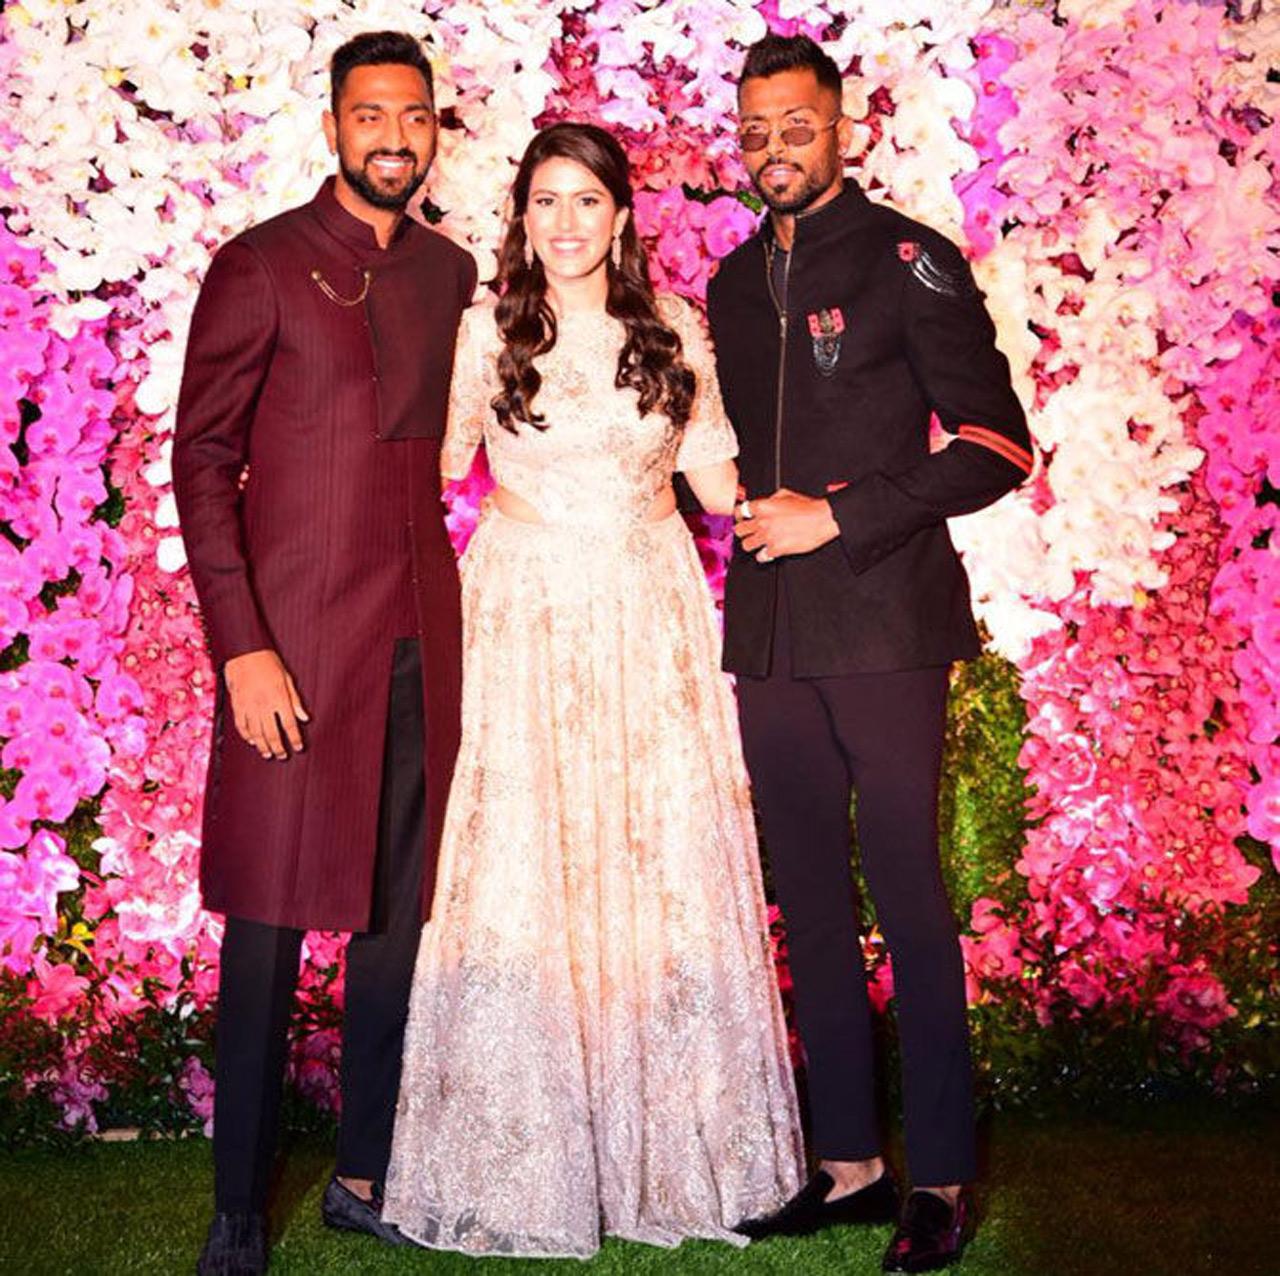 Hardik Pandya has a great bond with his sister-in-law and Krunal Pandya's wife, Pankhuri Sharma. The duo has been sharing fun posts together on social media for years. In pic - With Krunal Pandya and Pankhuri Sharma